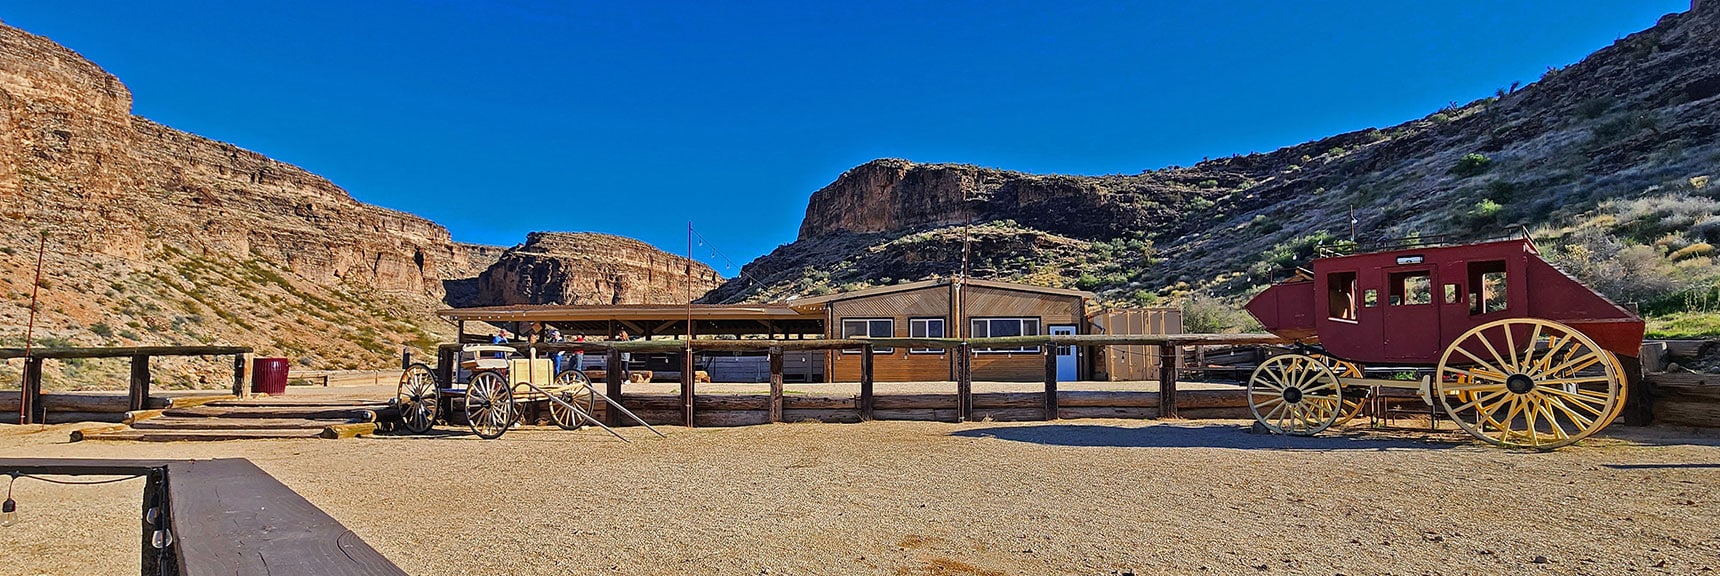 The Main Starting Point for Horseback Riding Appears to Be the Upper Corrals. | Fossil Canyon | Cowboy Canyon | Blue Diamond Hill, Nevada